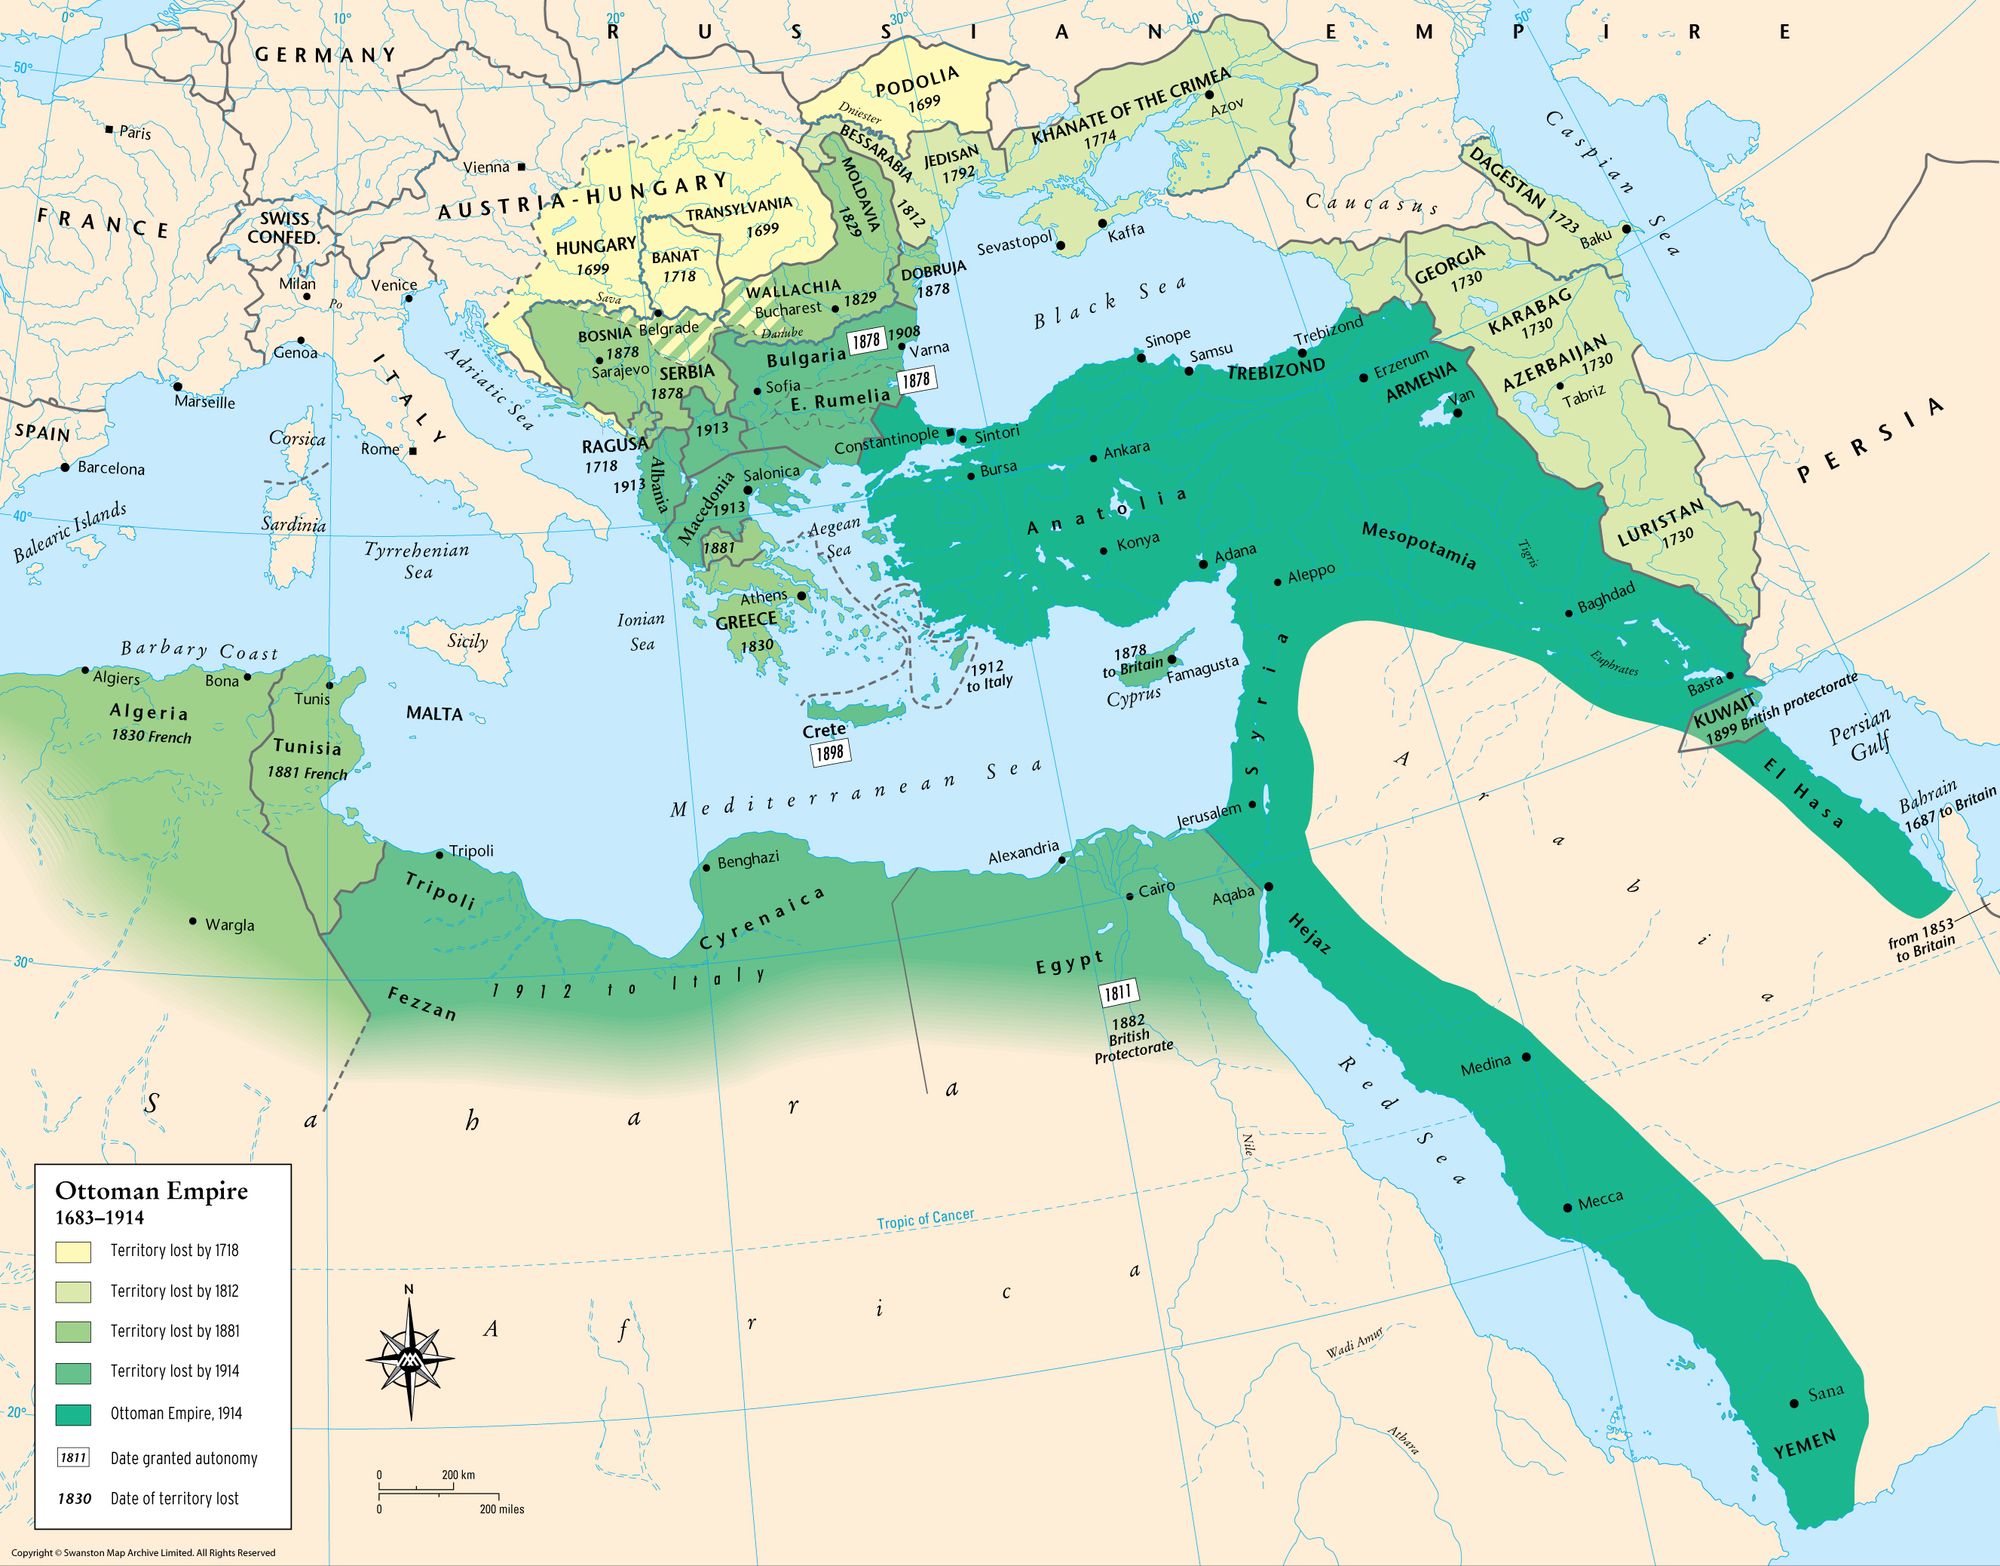 An example of the Ottomans in decline map https://www.themaparchive.com/product/ottoman-empire-16831914/